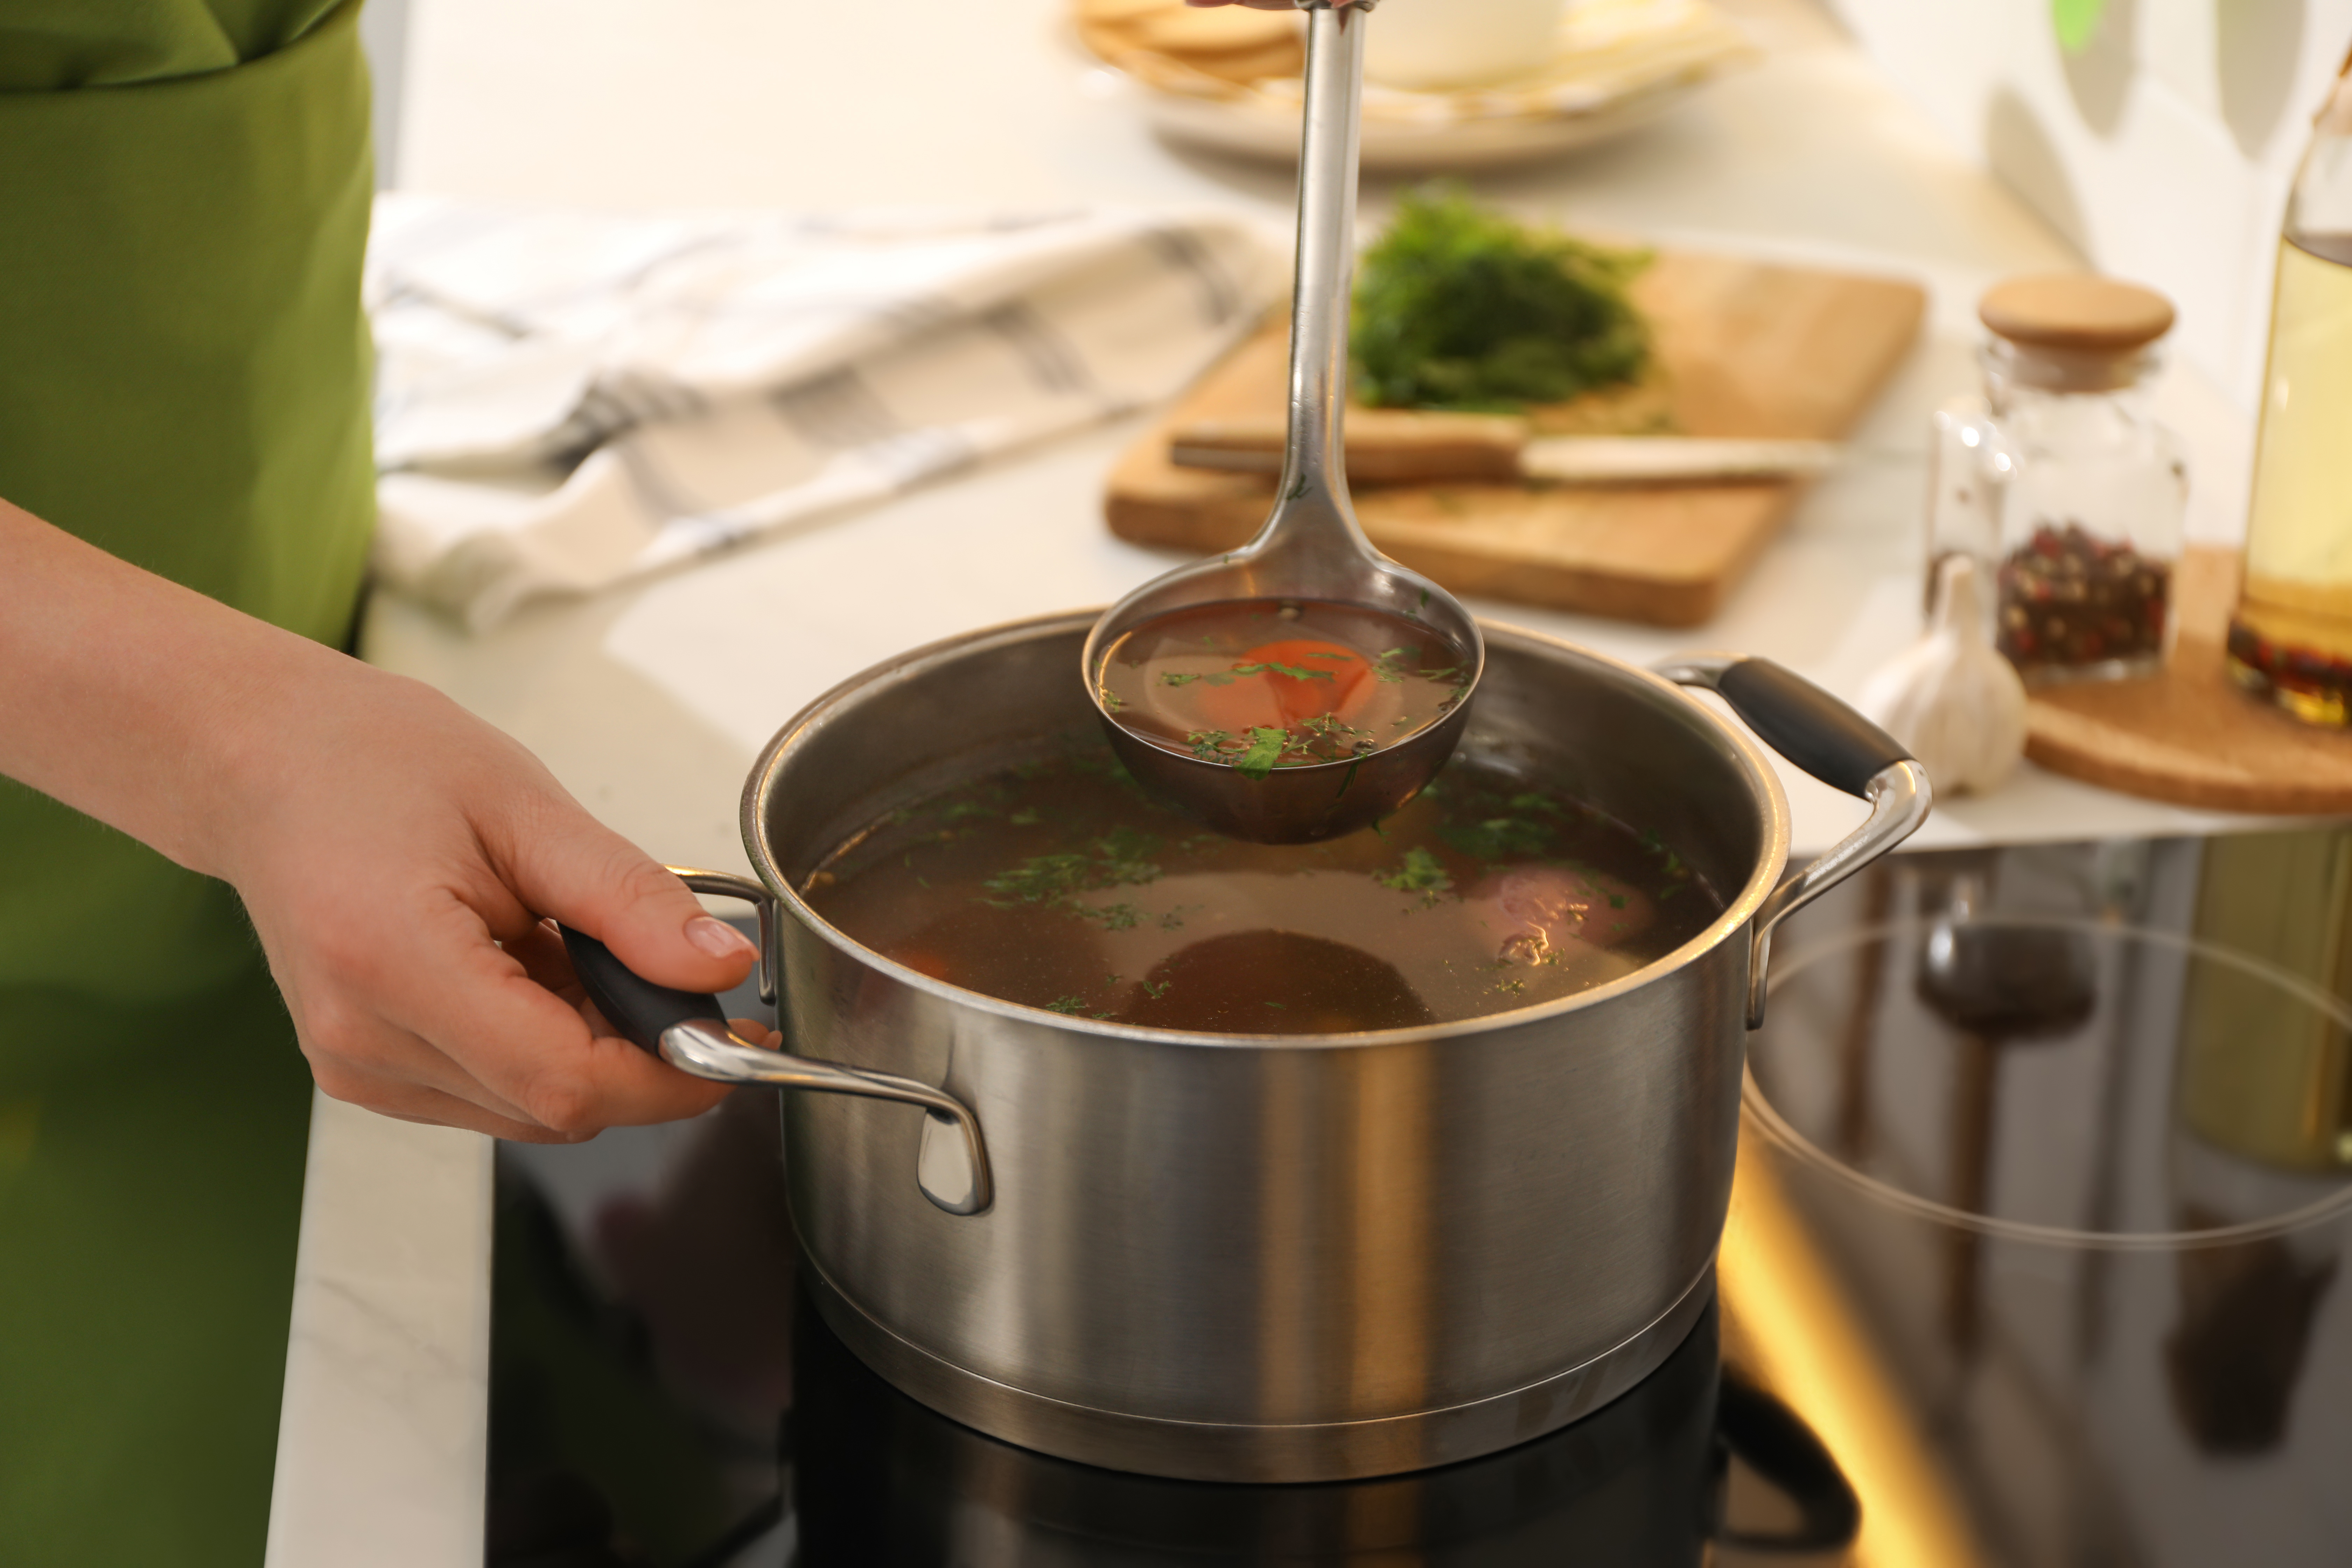 Bone Broth: The Benefits and the Risks